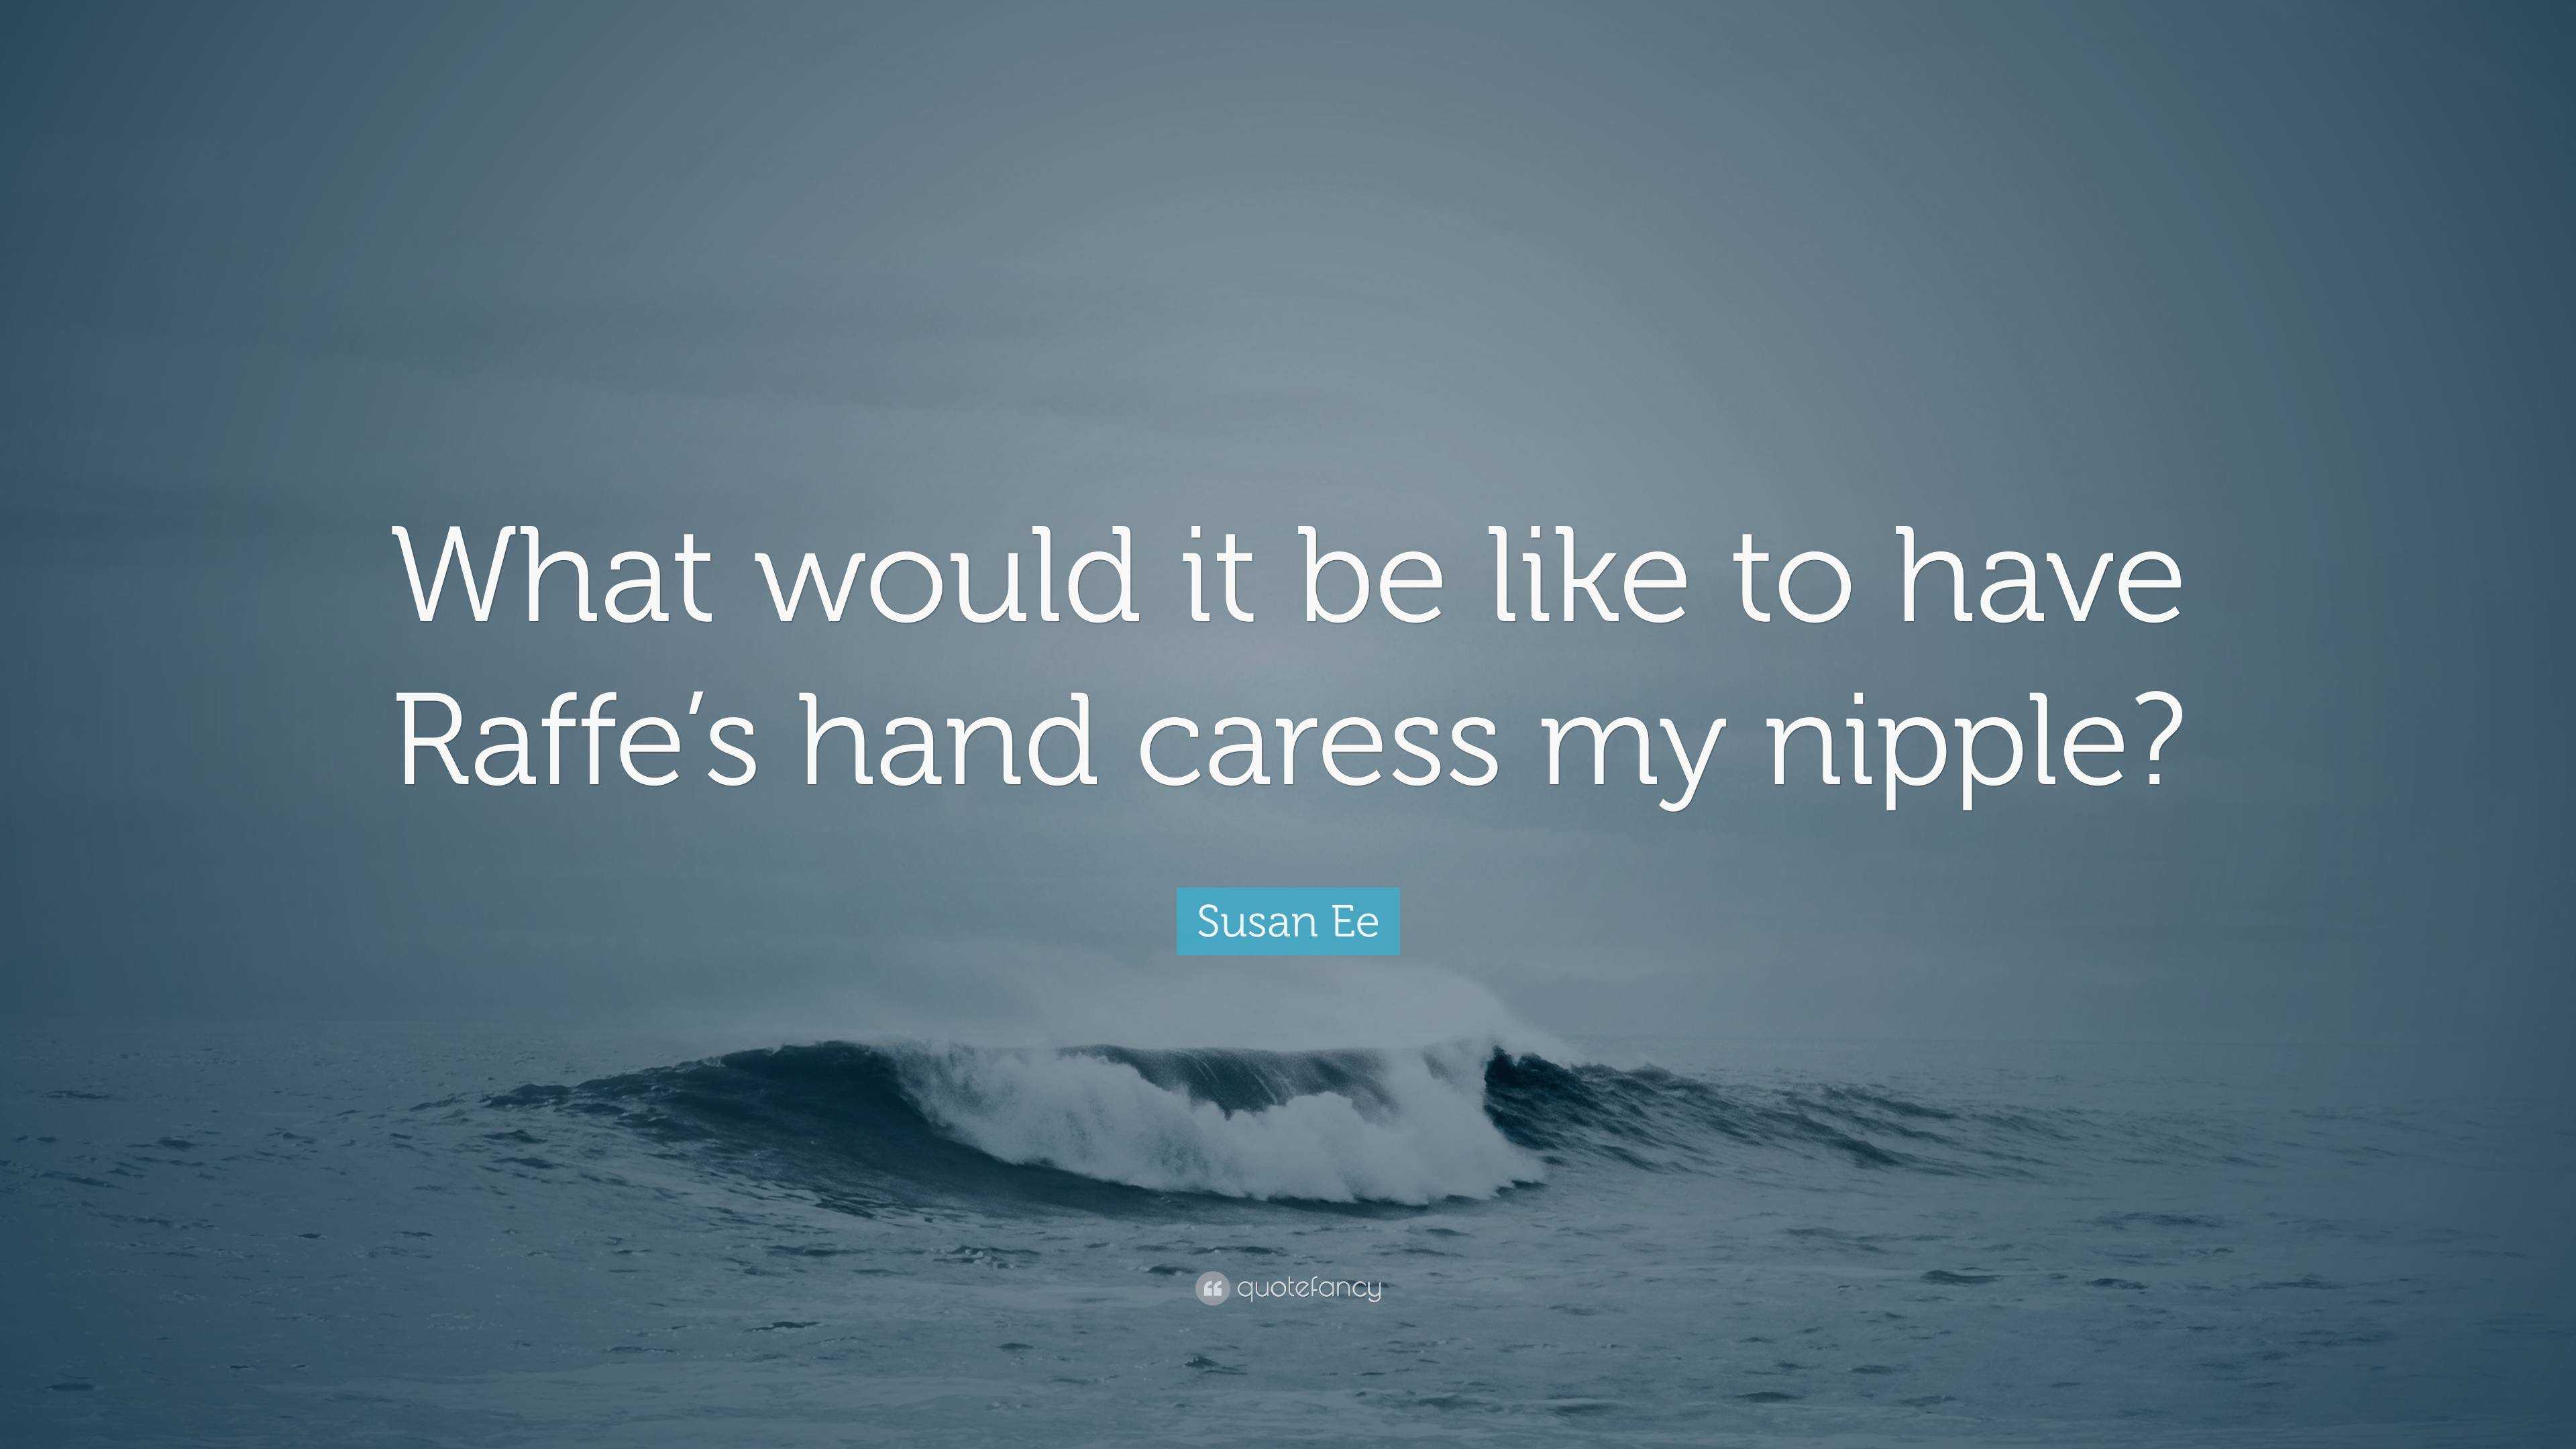 https://quotefancy.com/media/wallpaper/3840x2160/6597300-Susan-Ee-Quote-What-would-it-be-like-to-have-Raffe-s-hand-caress.jpg